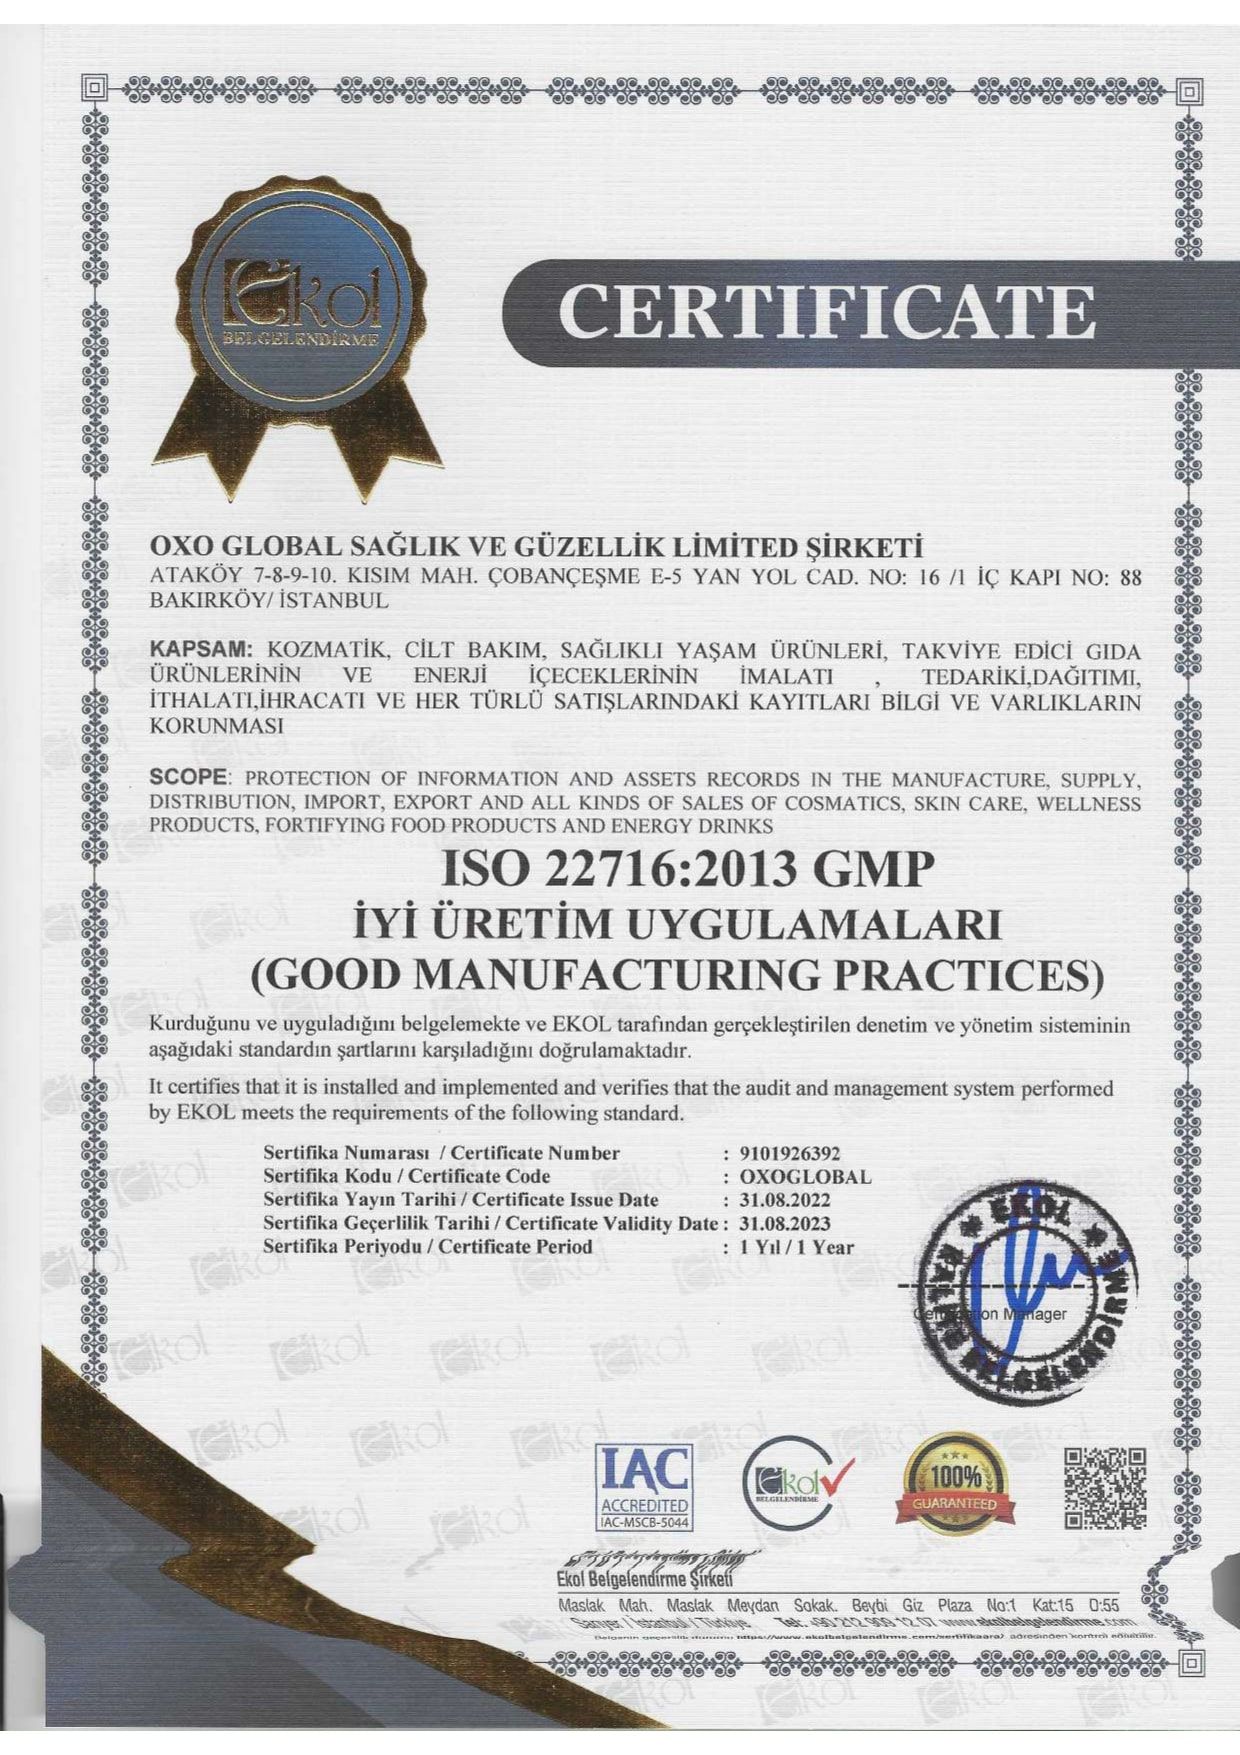 ISO 227162013 GMP GOOD MANUFACTURING PRACTICES (GOOD MANUFACTURING PRACTICES)